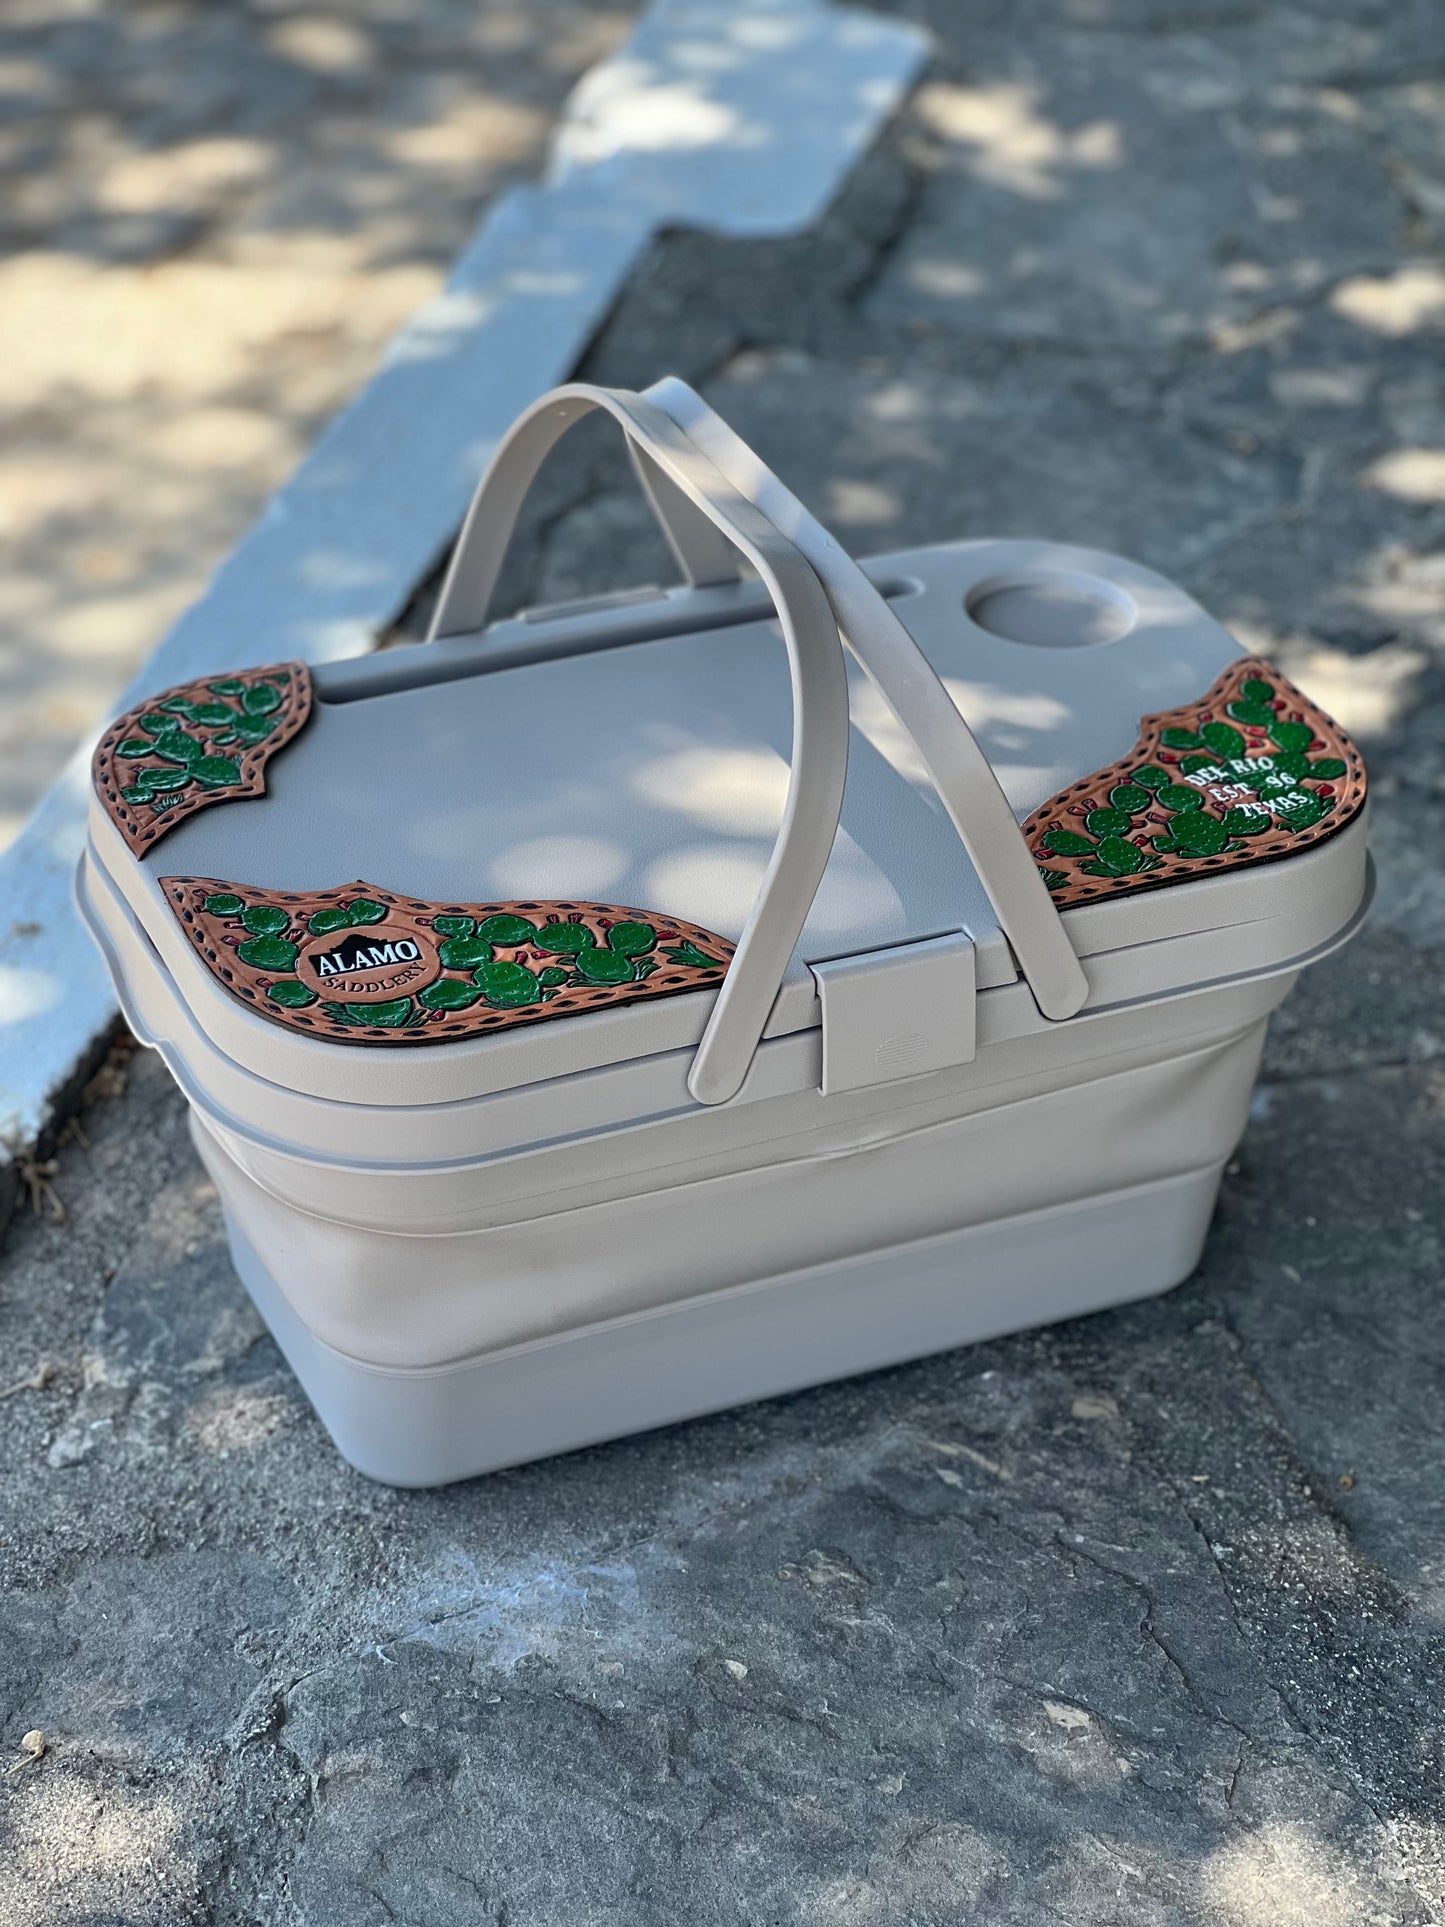 Cactus Collapsible Cooler